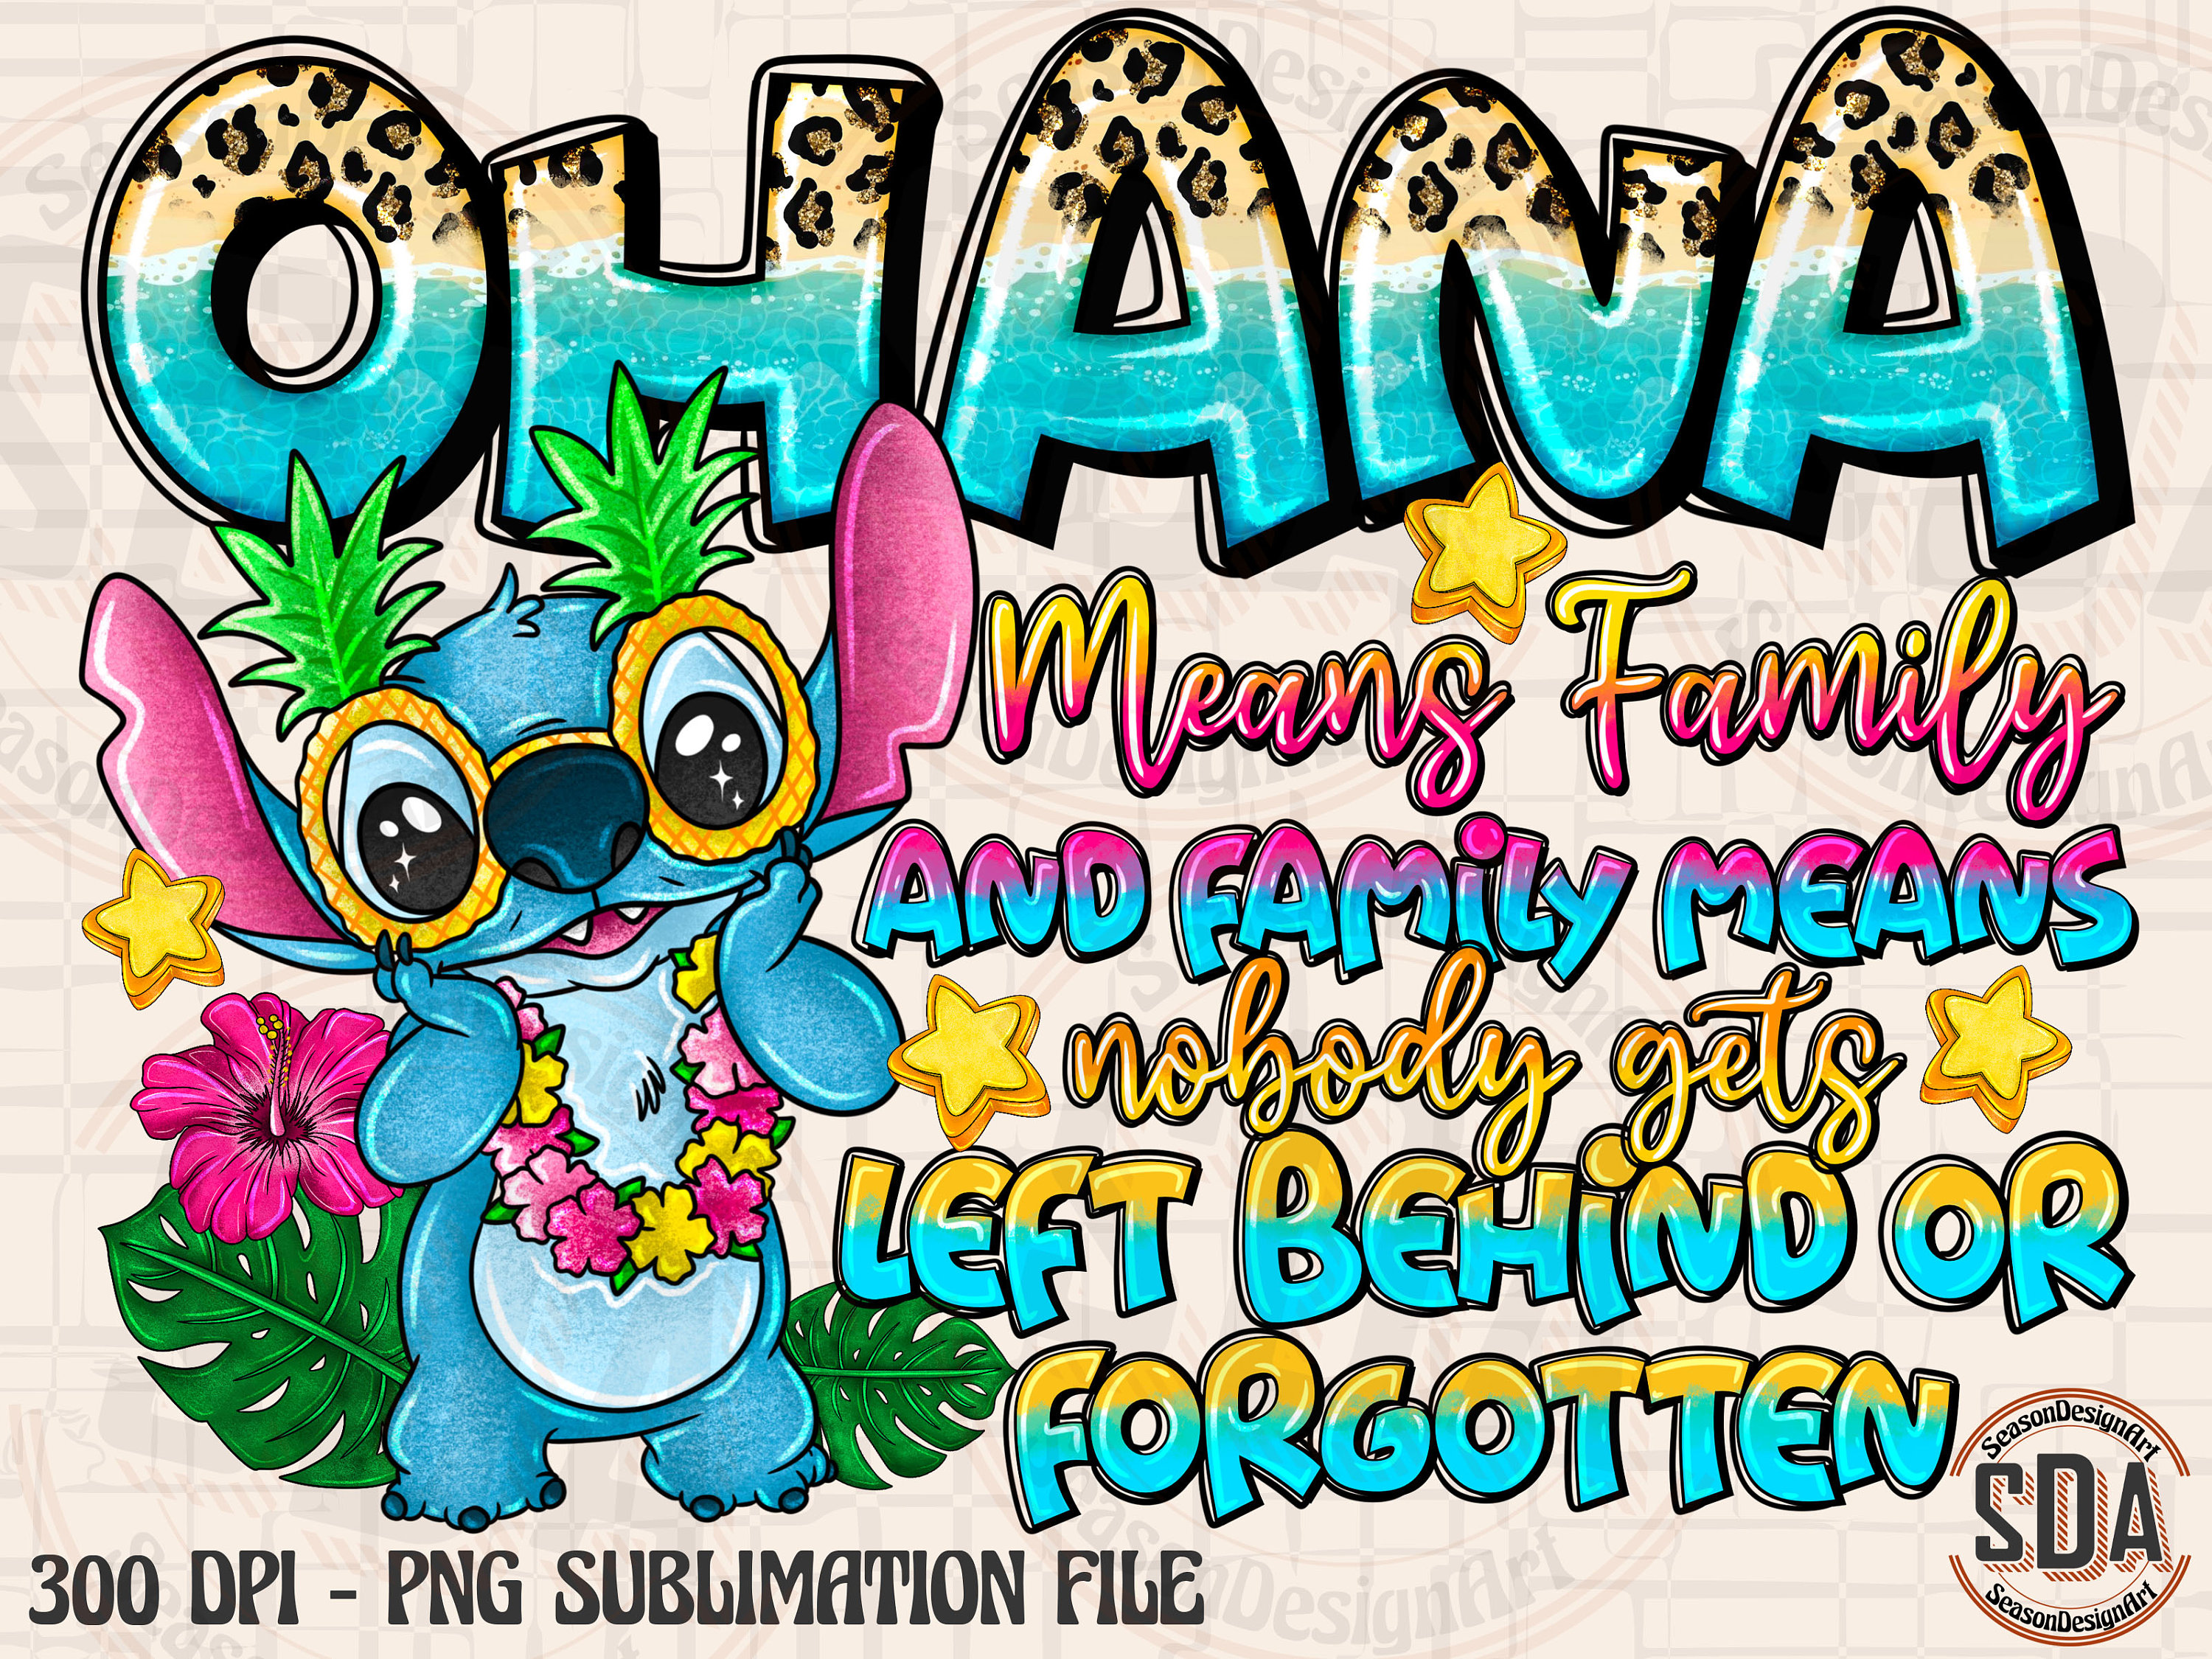 Stitch Print Ohana Means Family Watercolor Poster Stitch Painting Stitch  Lilo Illustration Ohana Means Family Printable Digital Download